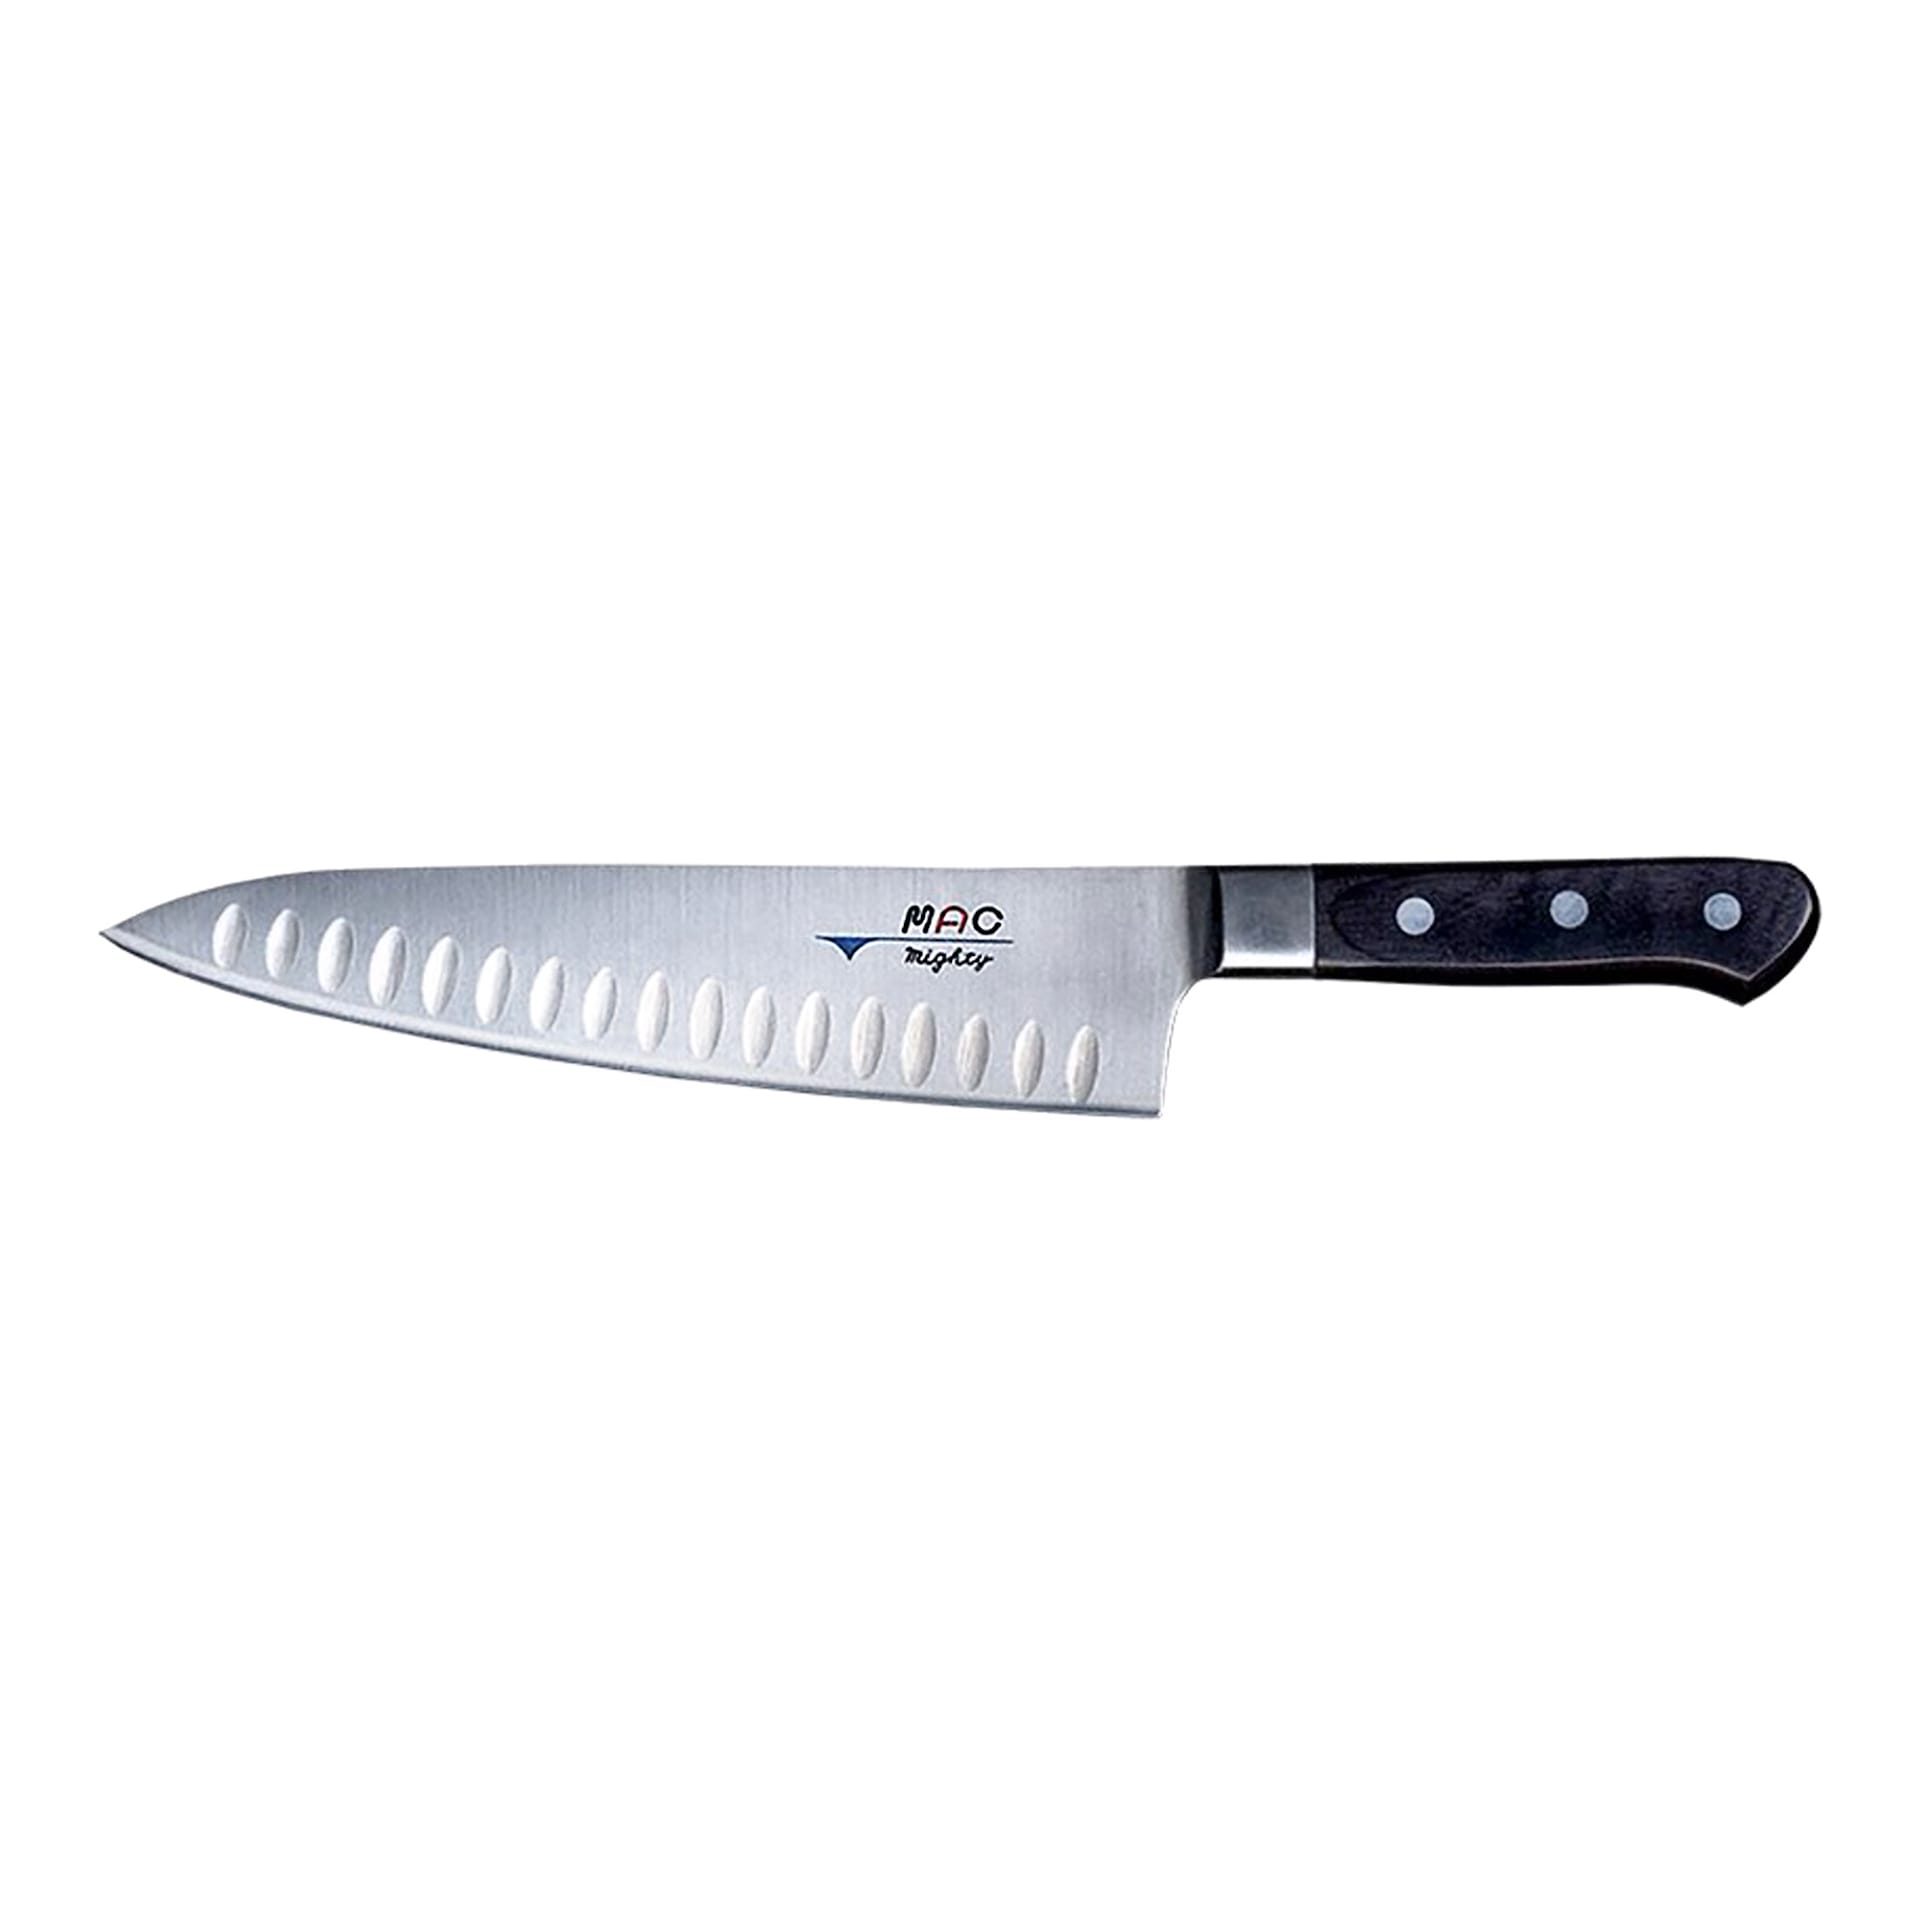 Mighty - Chef's knife with olive sharpening, 20 cm - MAC - NO GA